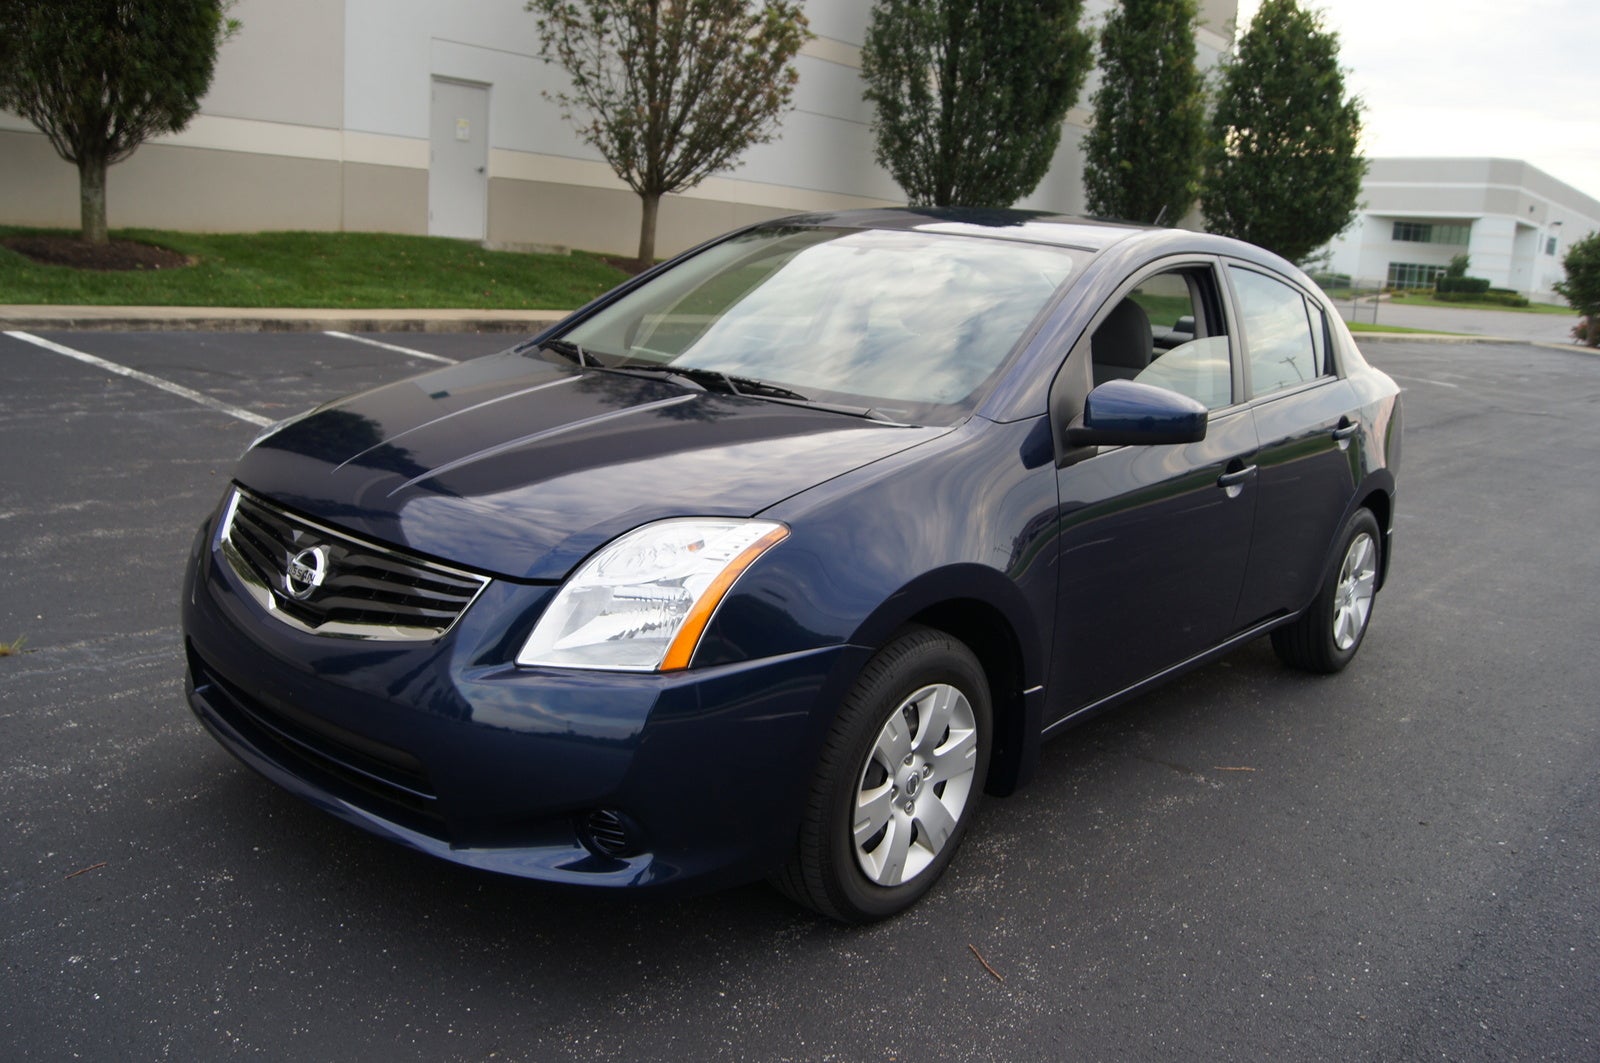 Ratings for 2010 nissan sentra #2